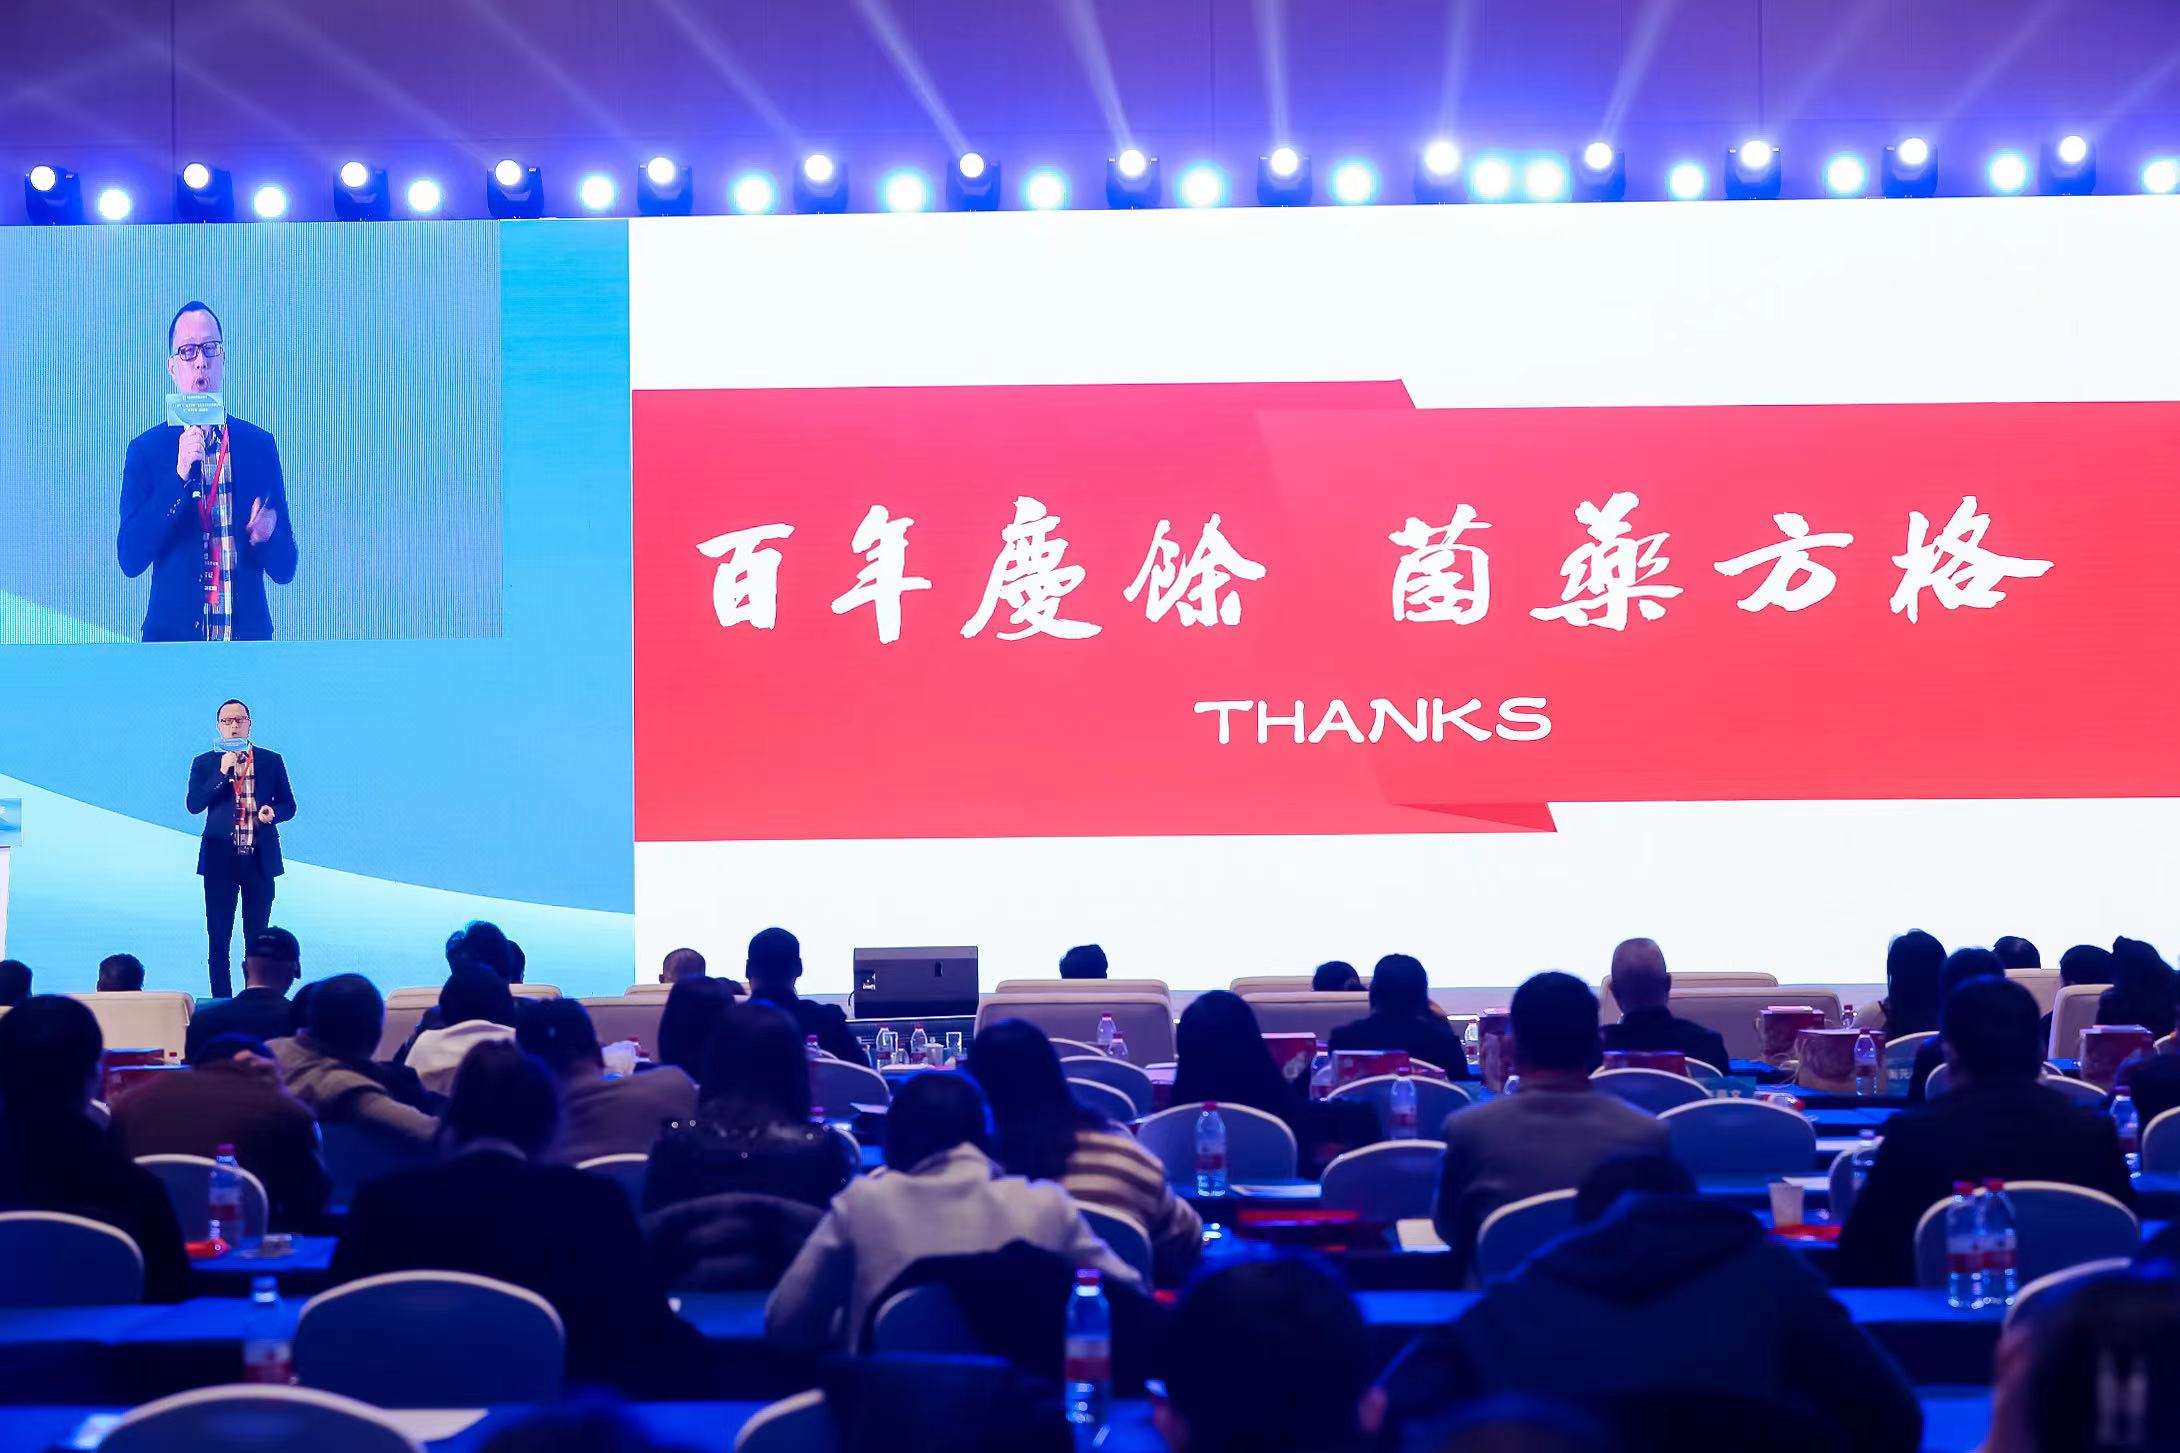 Fangge Pharmaceutical was awarded the "Healthy China" Enterprise Response Unit in Zhejiang Province